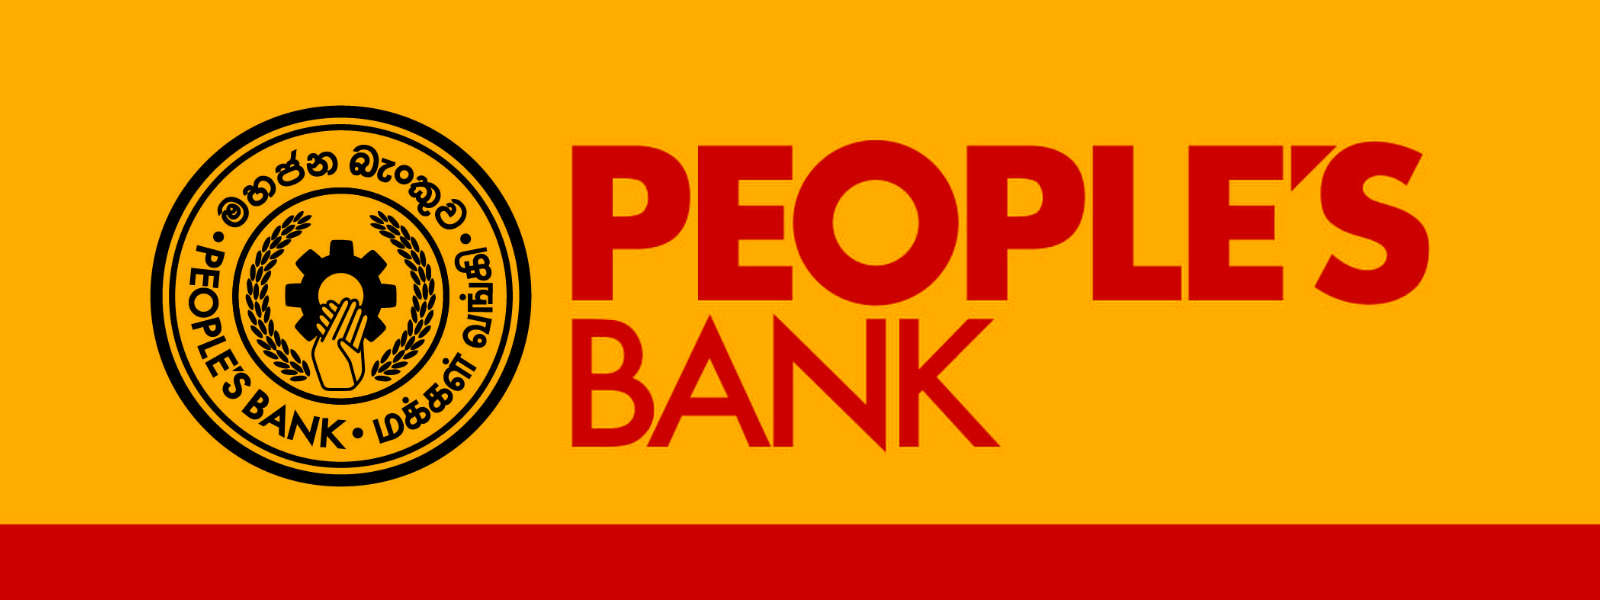 People's bank still at risk - Trade Unions